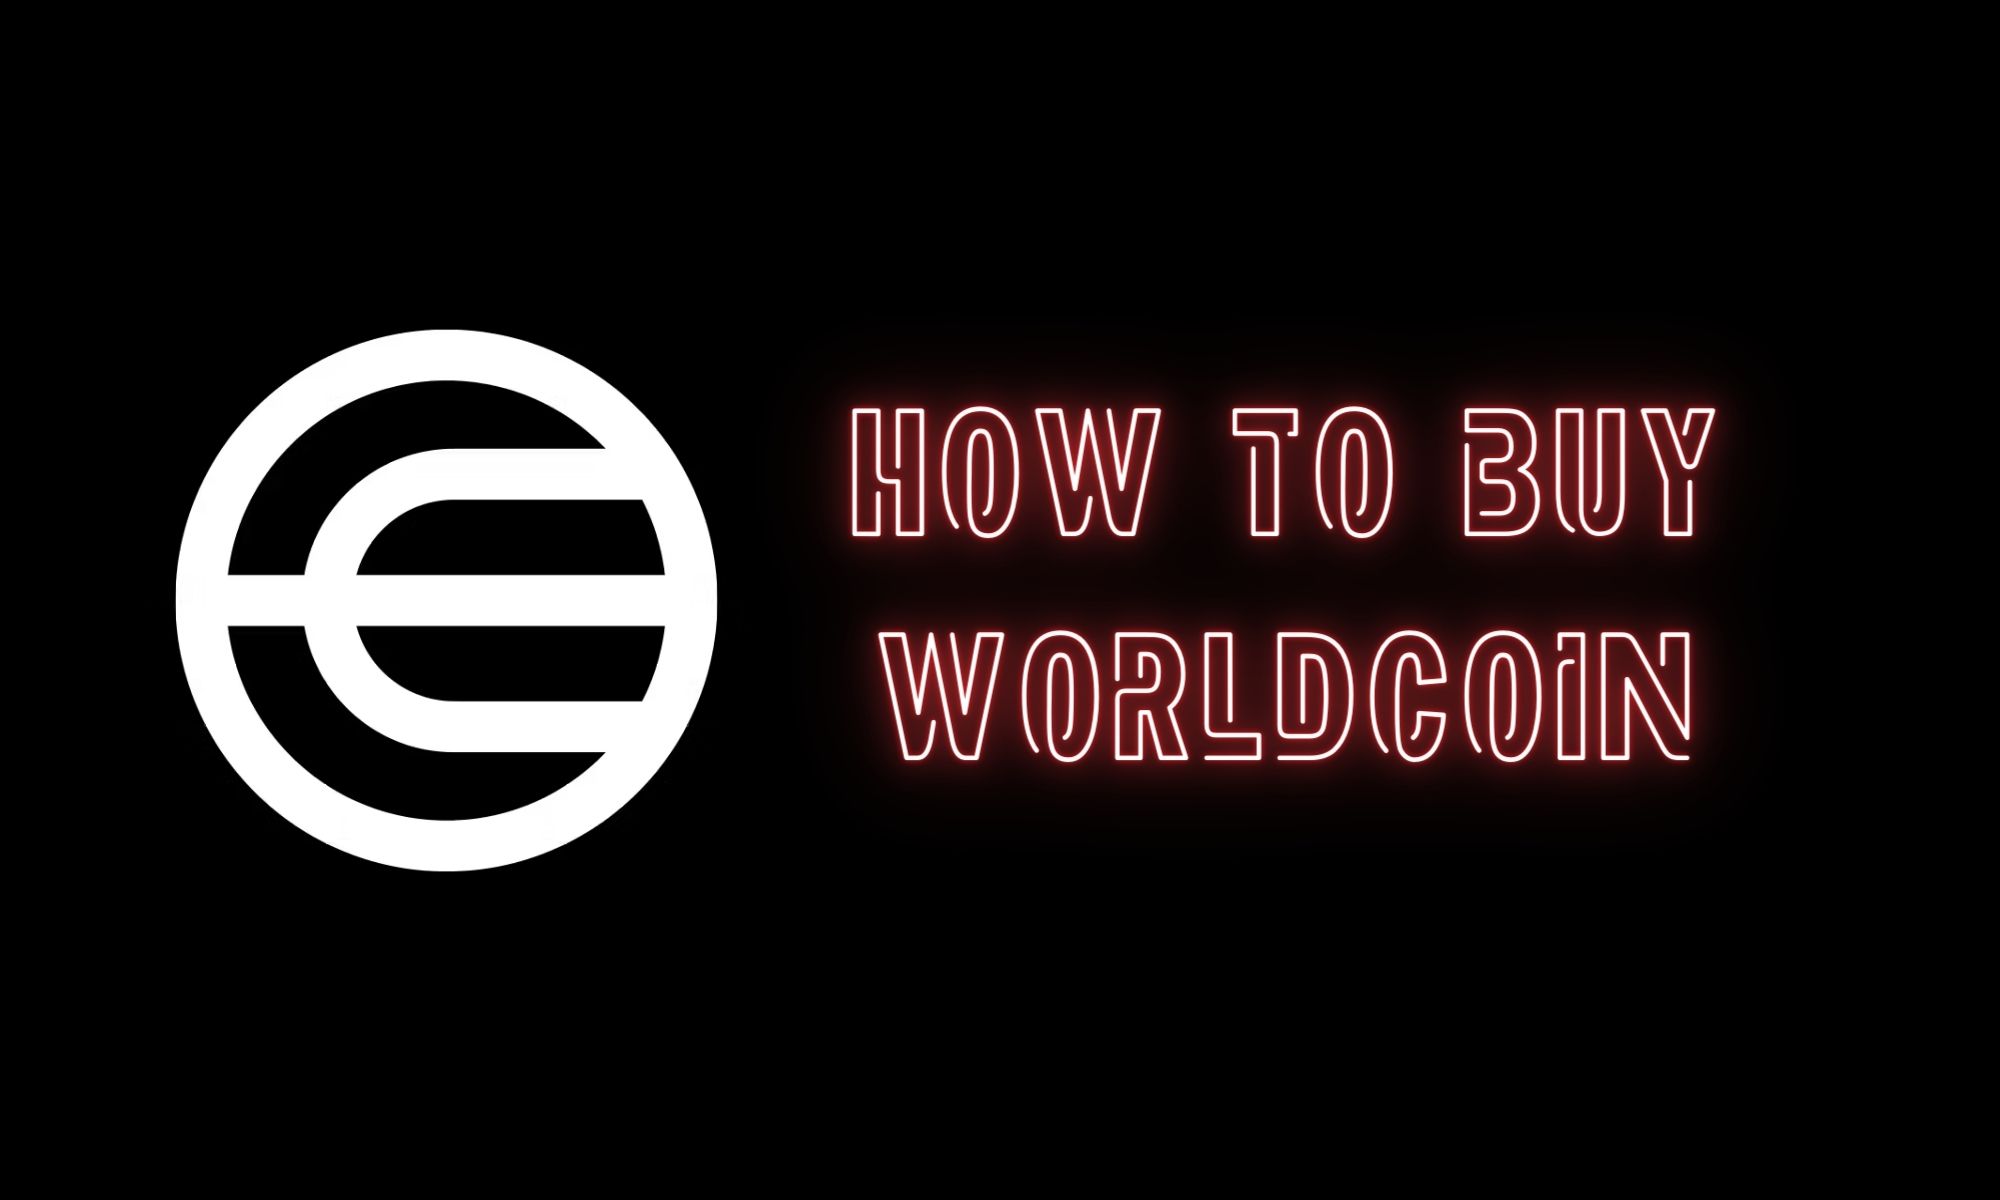 How to buy Worldcoin